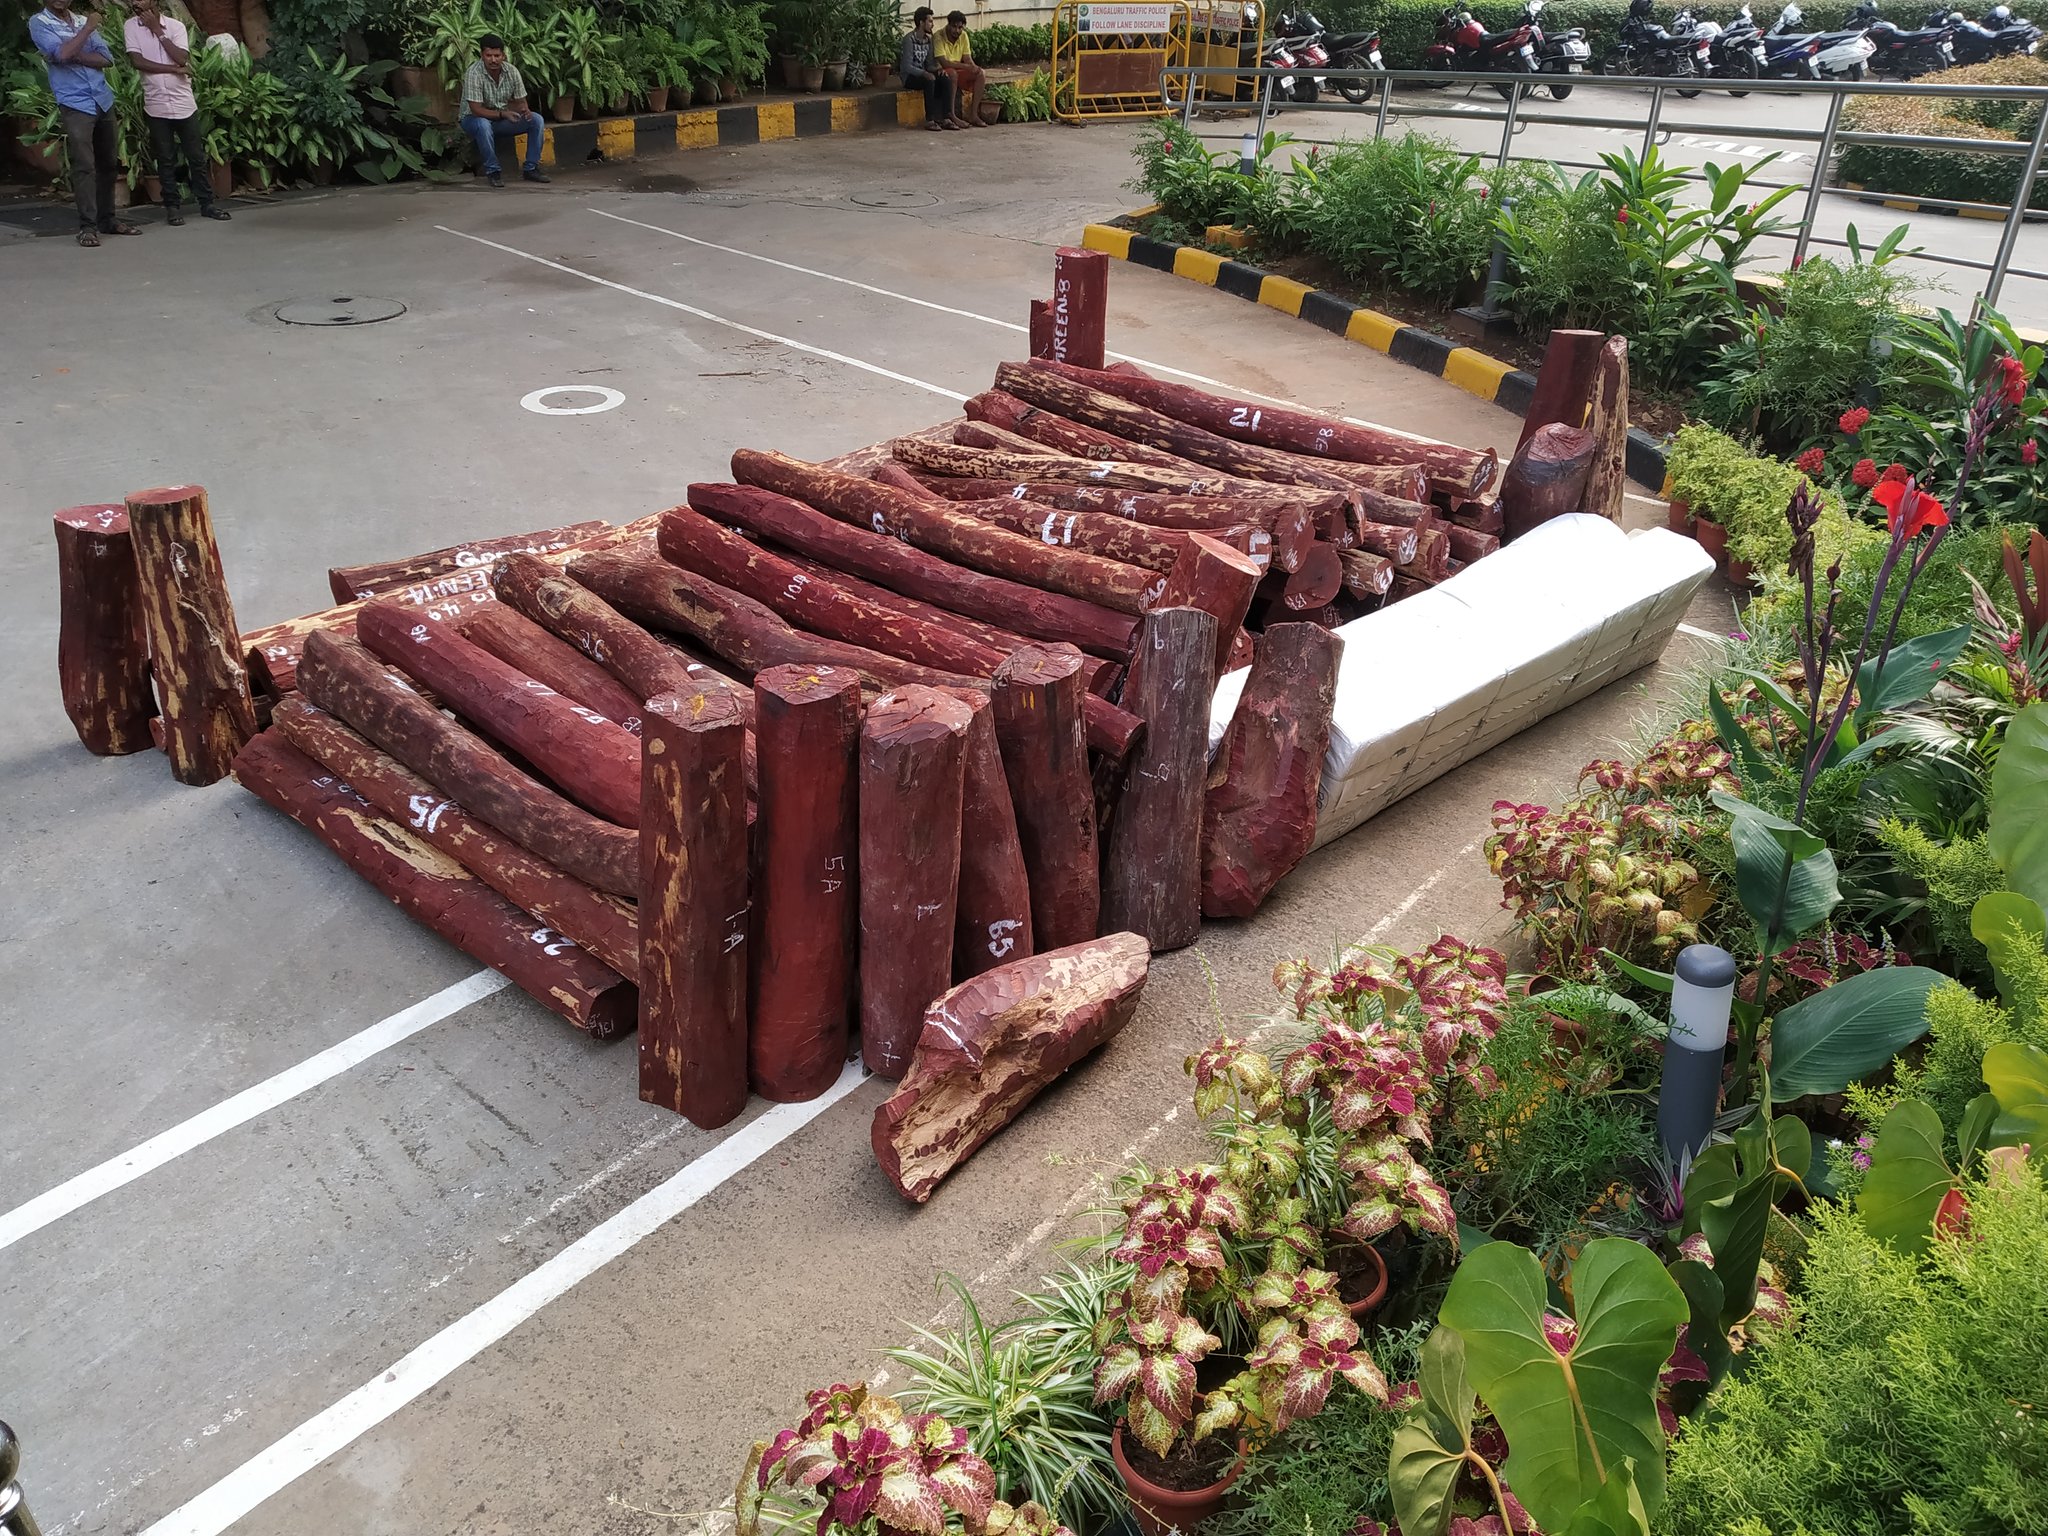 Seized Red Sanders put out on display in front of the City police commissioner's office in Bengaluru